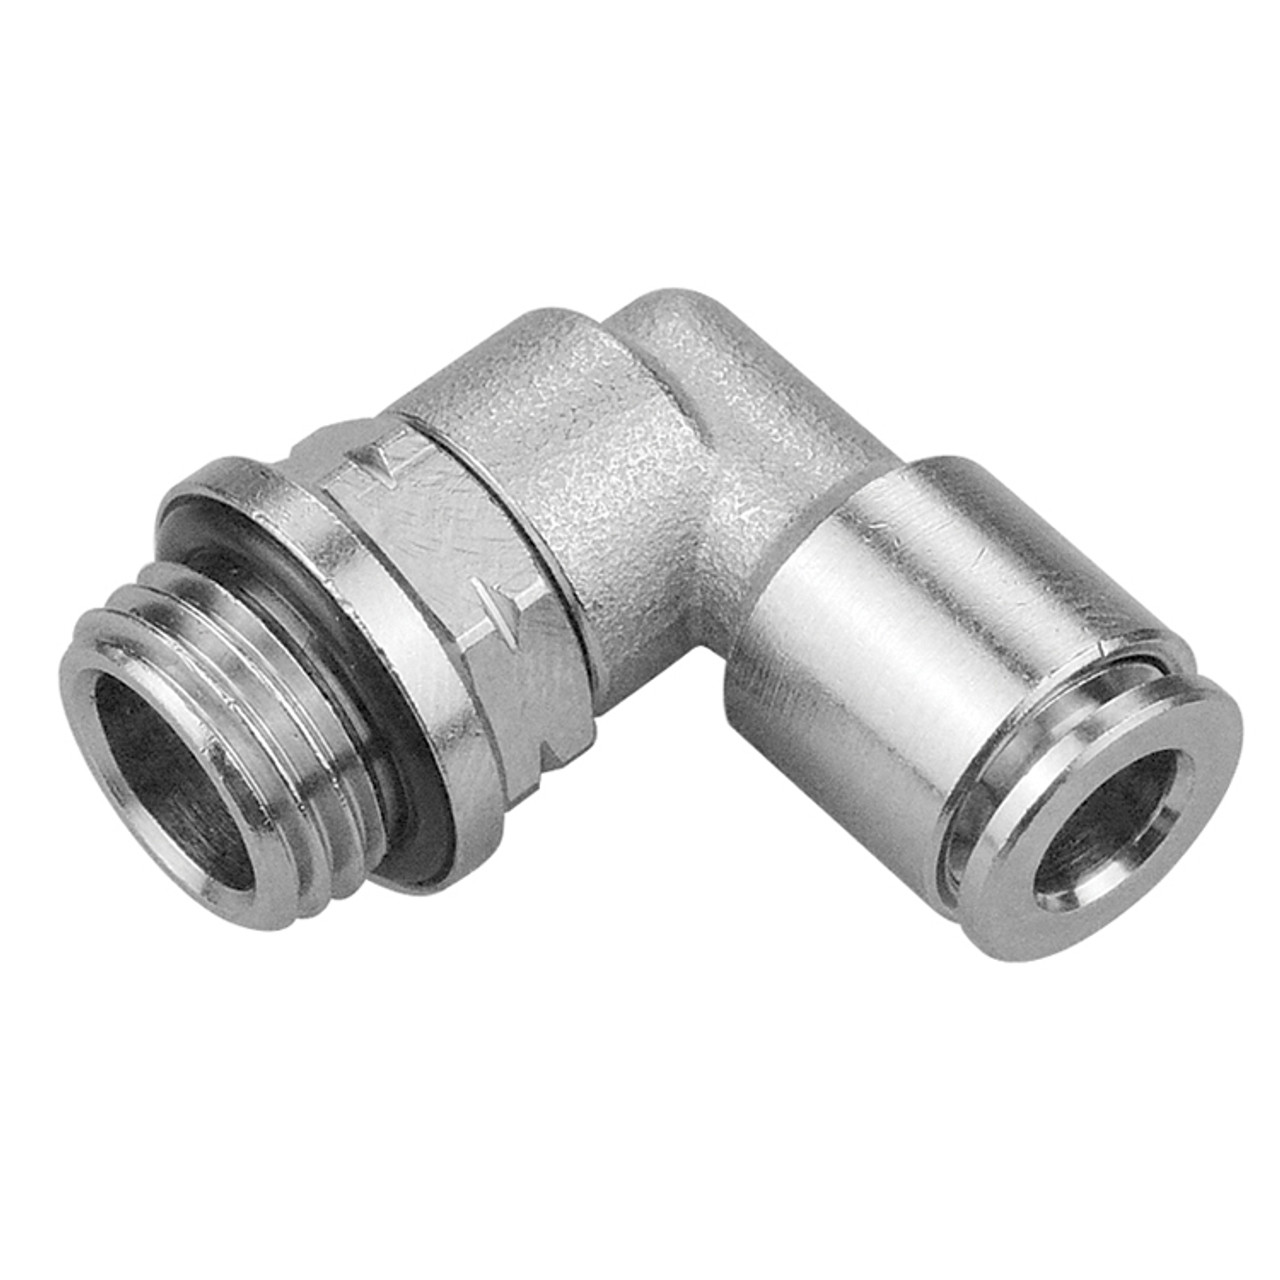 3/8 x 3/8" Nickel Plated Brass Uni Thread - Push-To-Connect 90° Elbow   G60918P-06-06